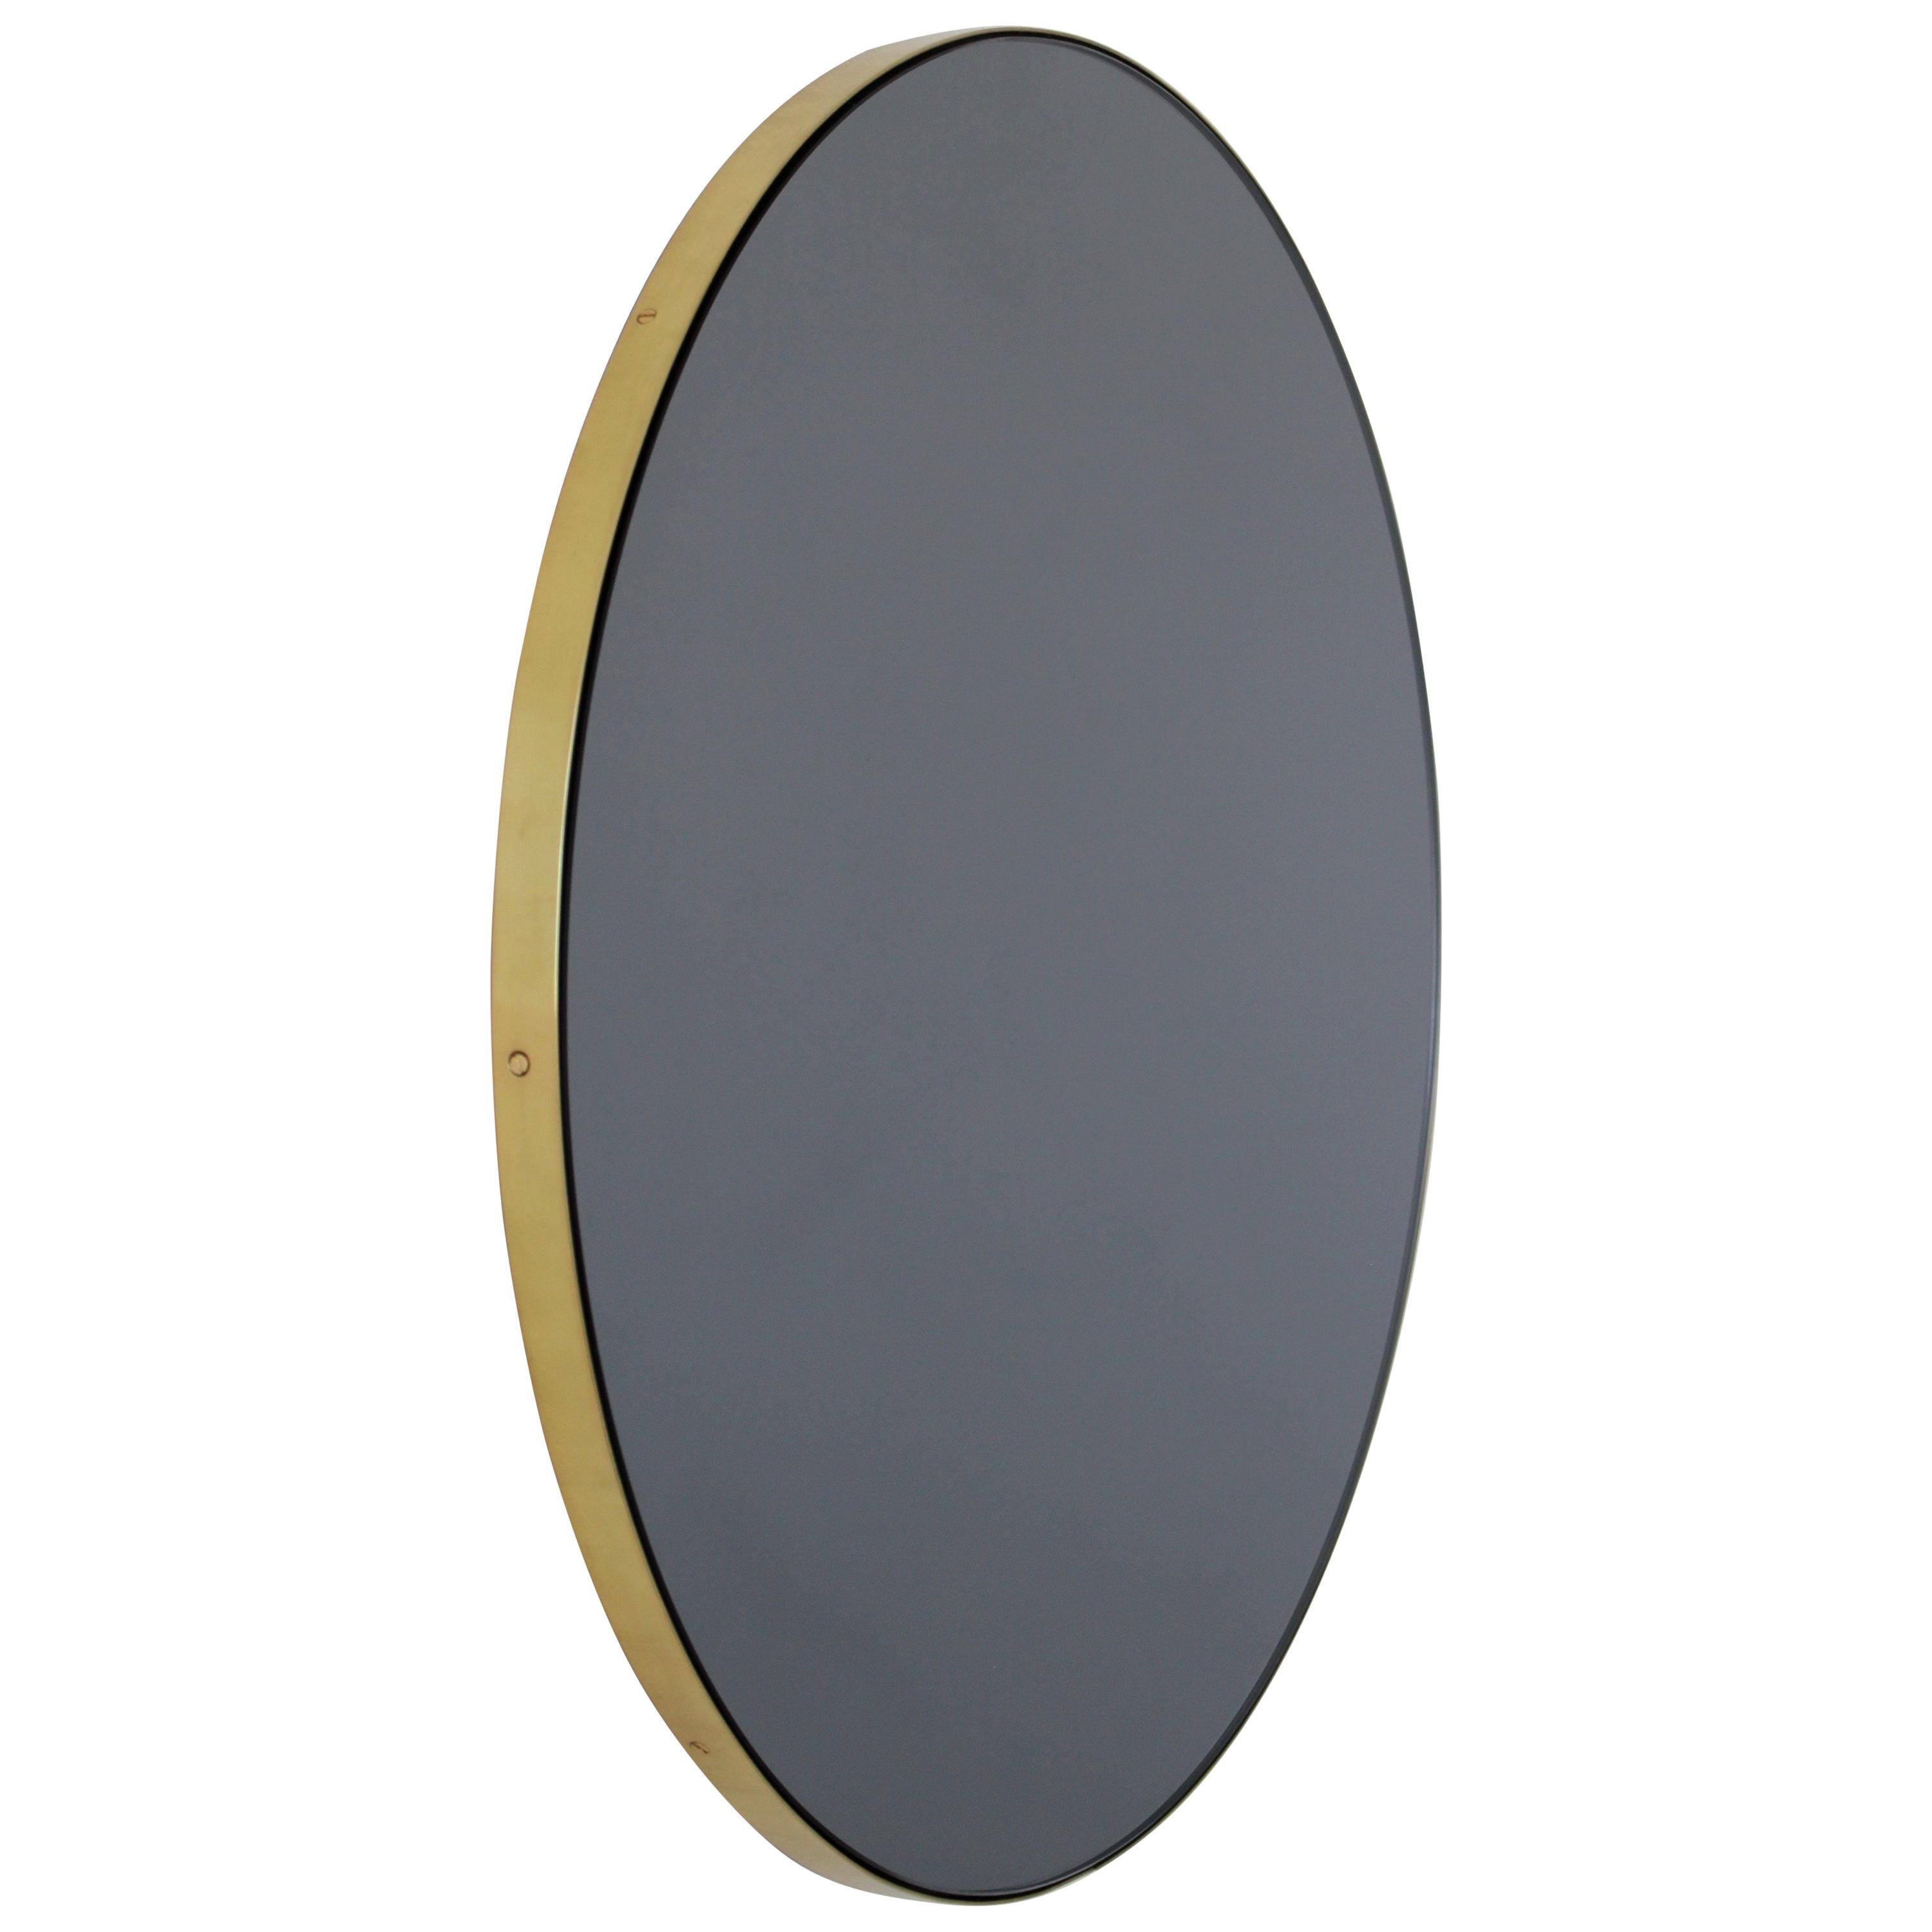 Orbis Black Tinted Round Contemporary Mirror with a Brass Frame, Small For Sale